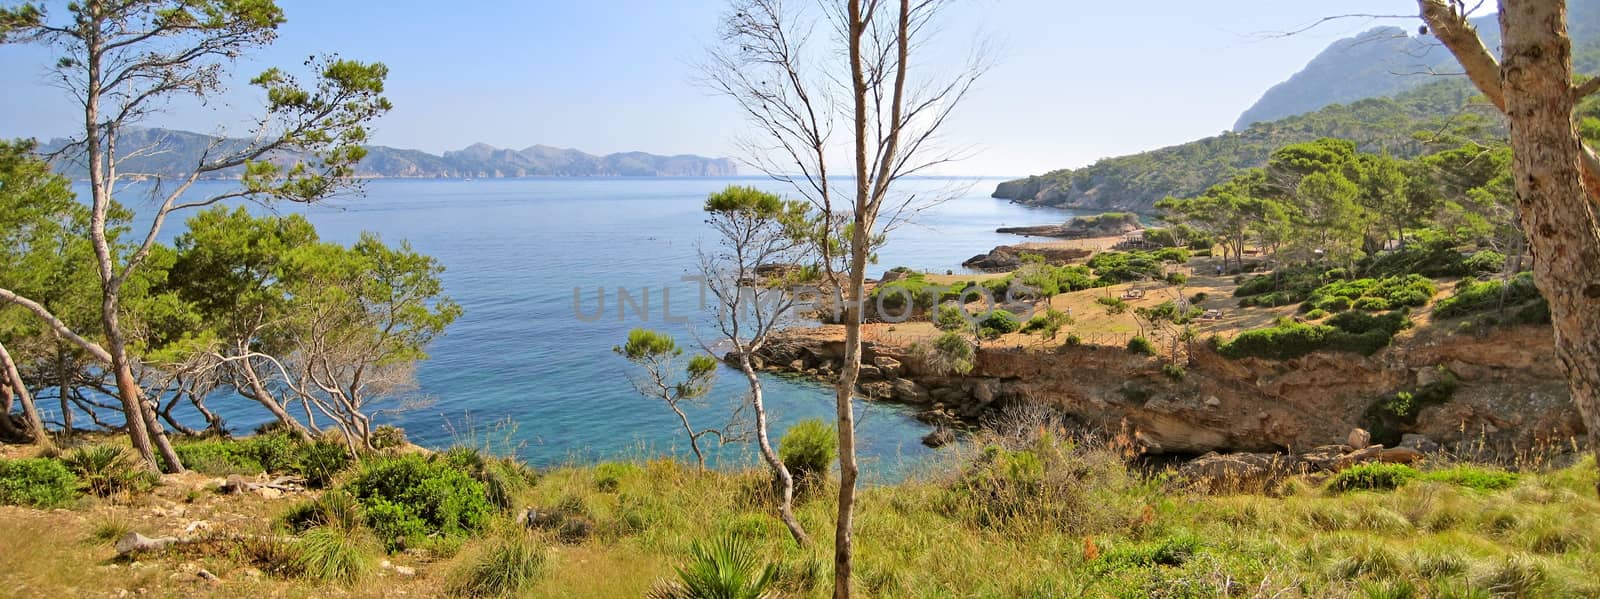 Peninsula Formentor, view from peninsula Victoria - coastal cliff coast with ocean view panorama